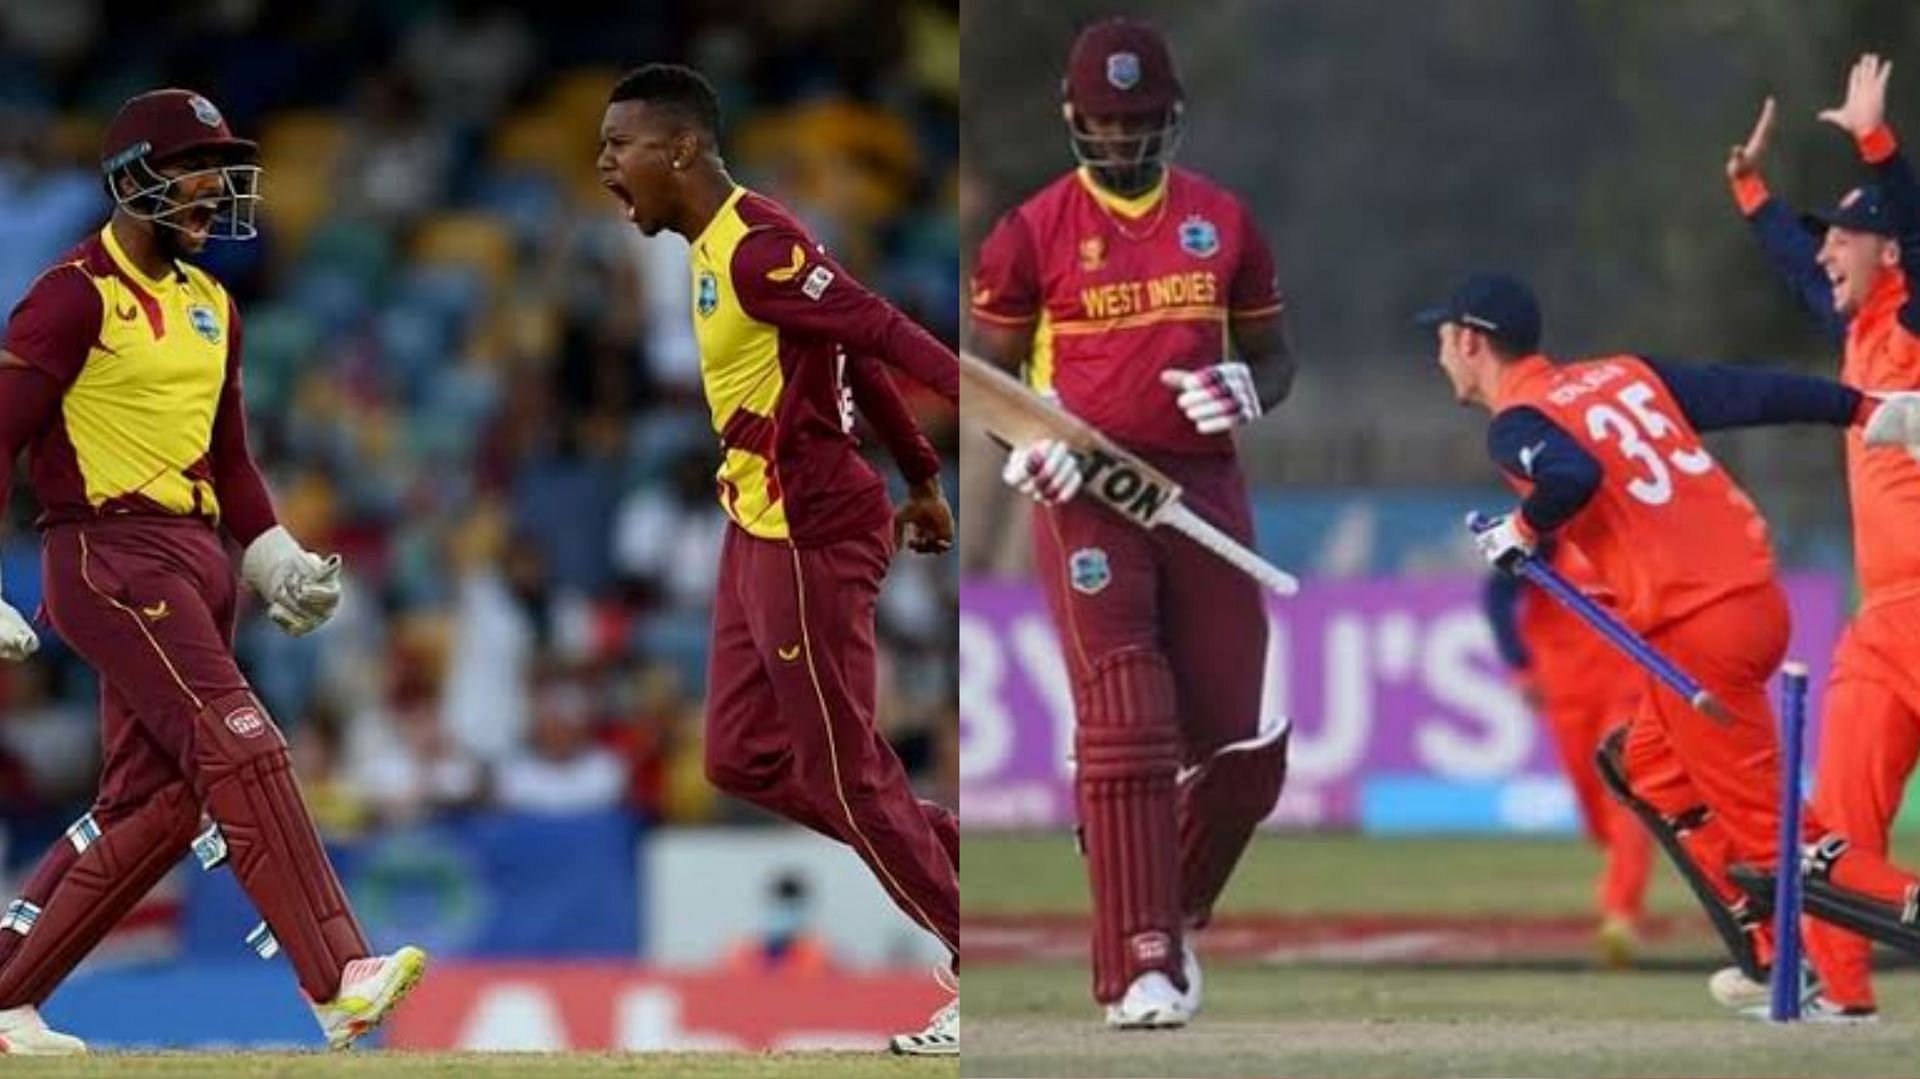 West Indies may not make it to the mega event in India